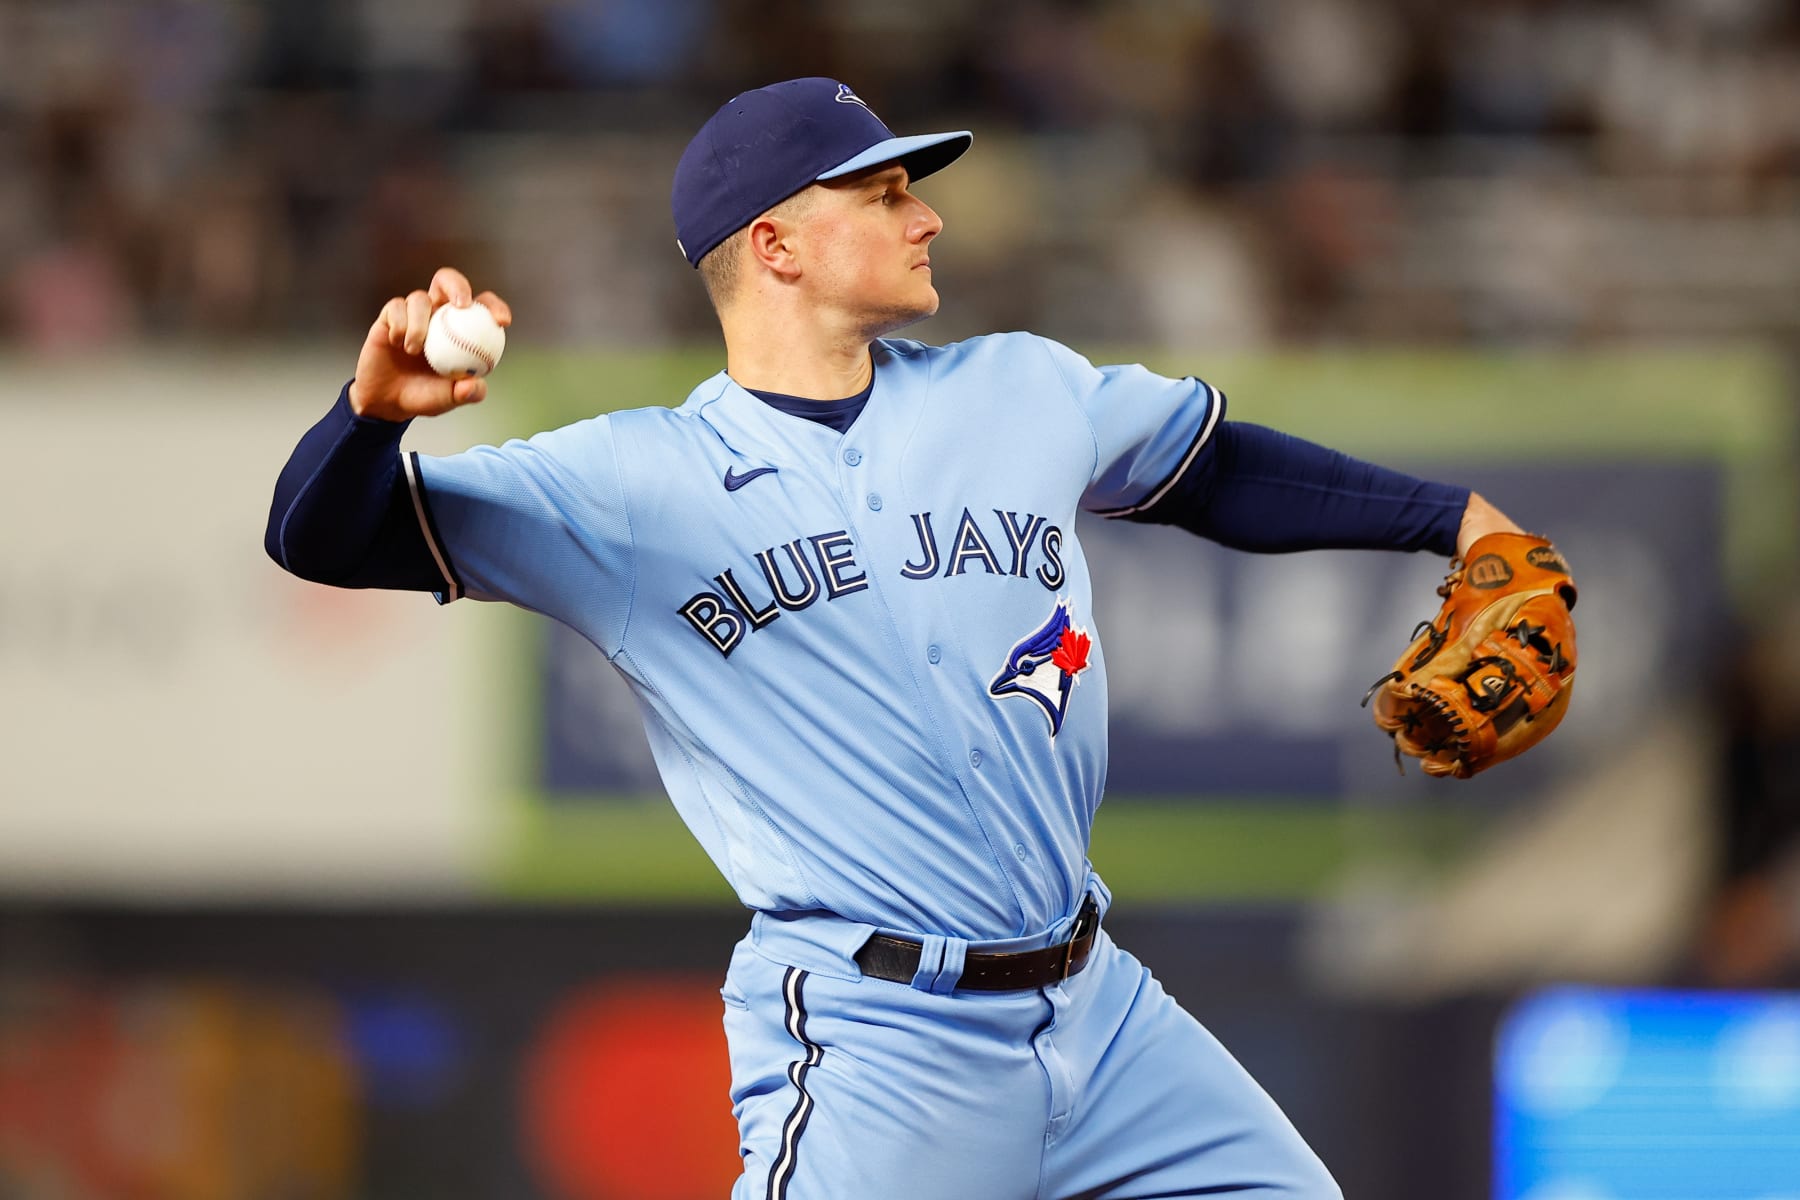 After missing on Ohtani and Soto, Blue Jays back to relying on